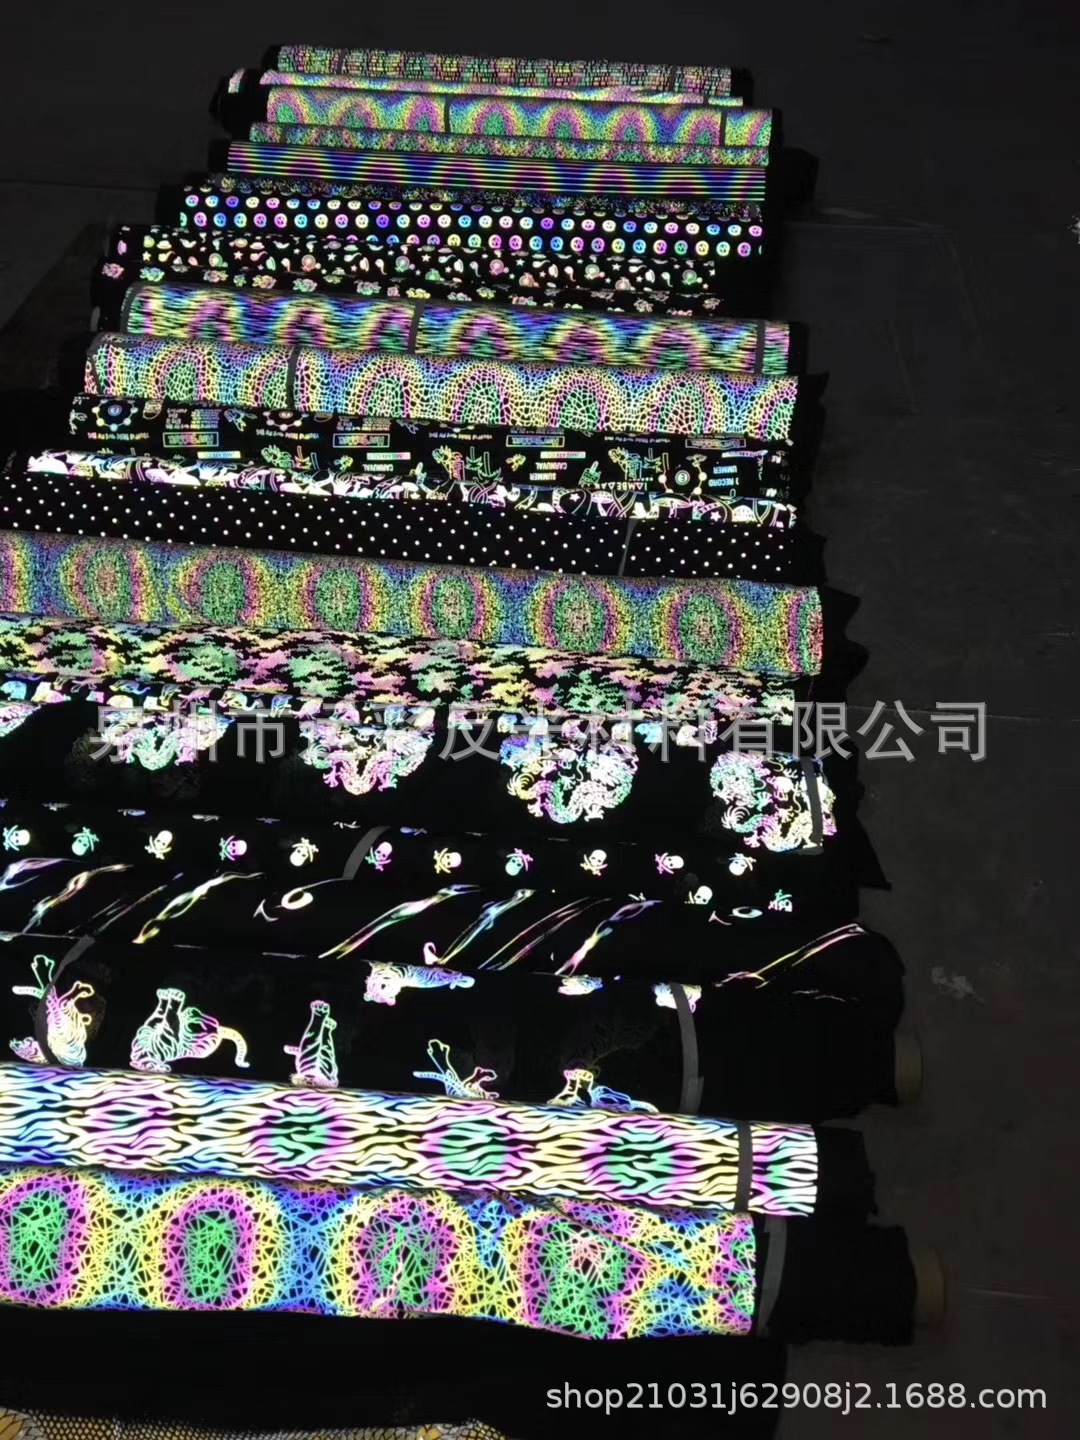 Supplying Customized Symphony Reflective Calico Colorful printing Reflective fabric printing silvery Reflective Fabric